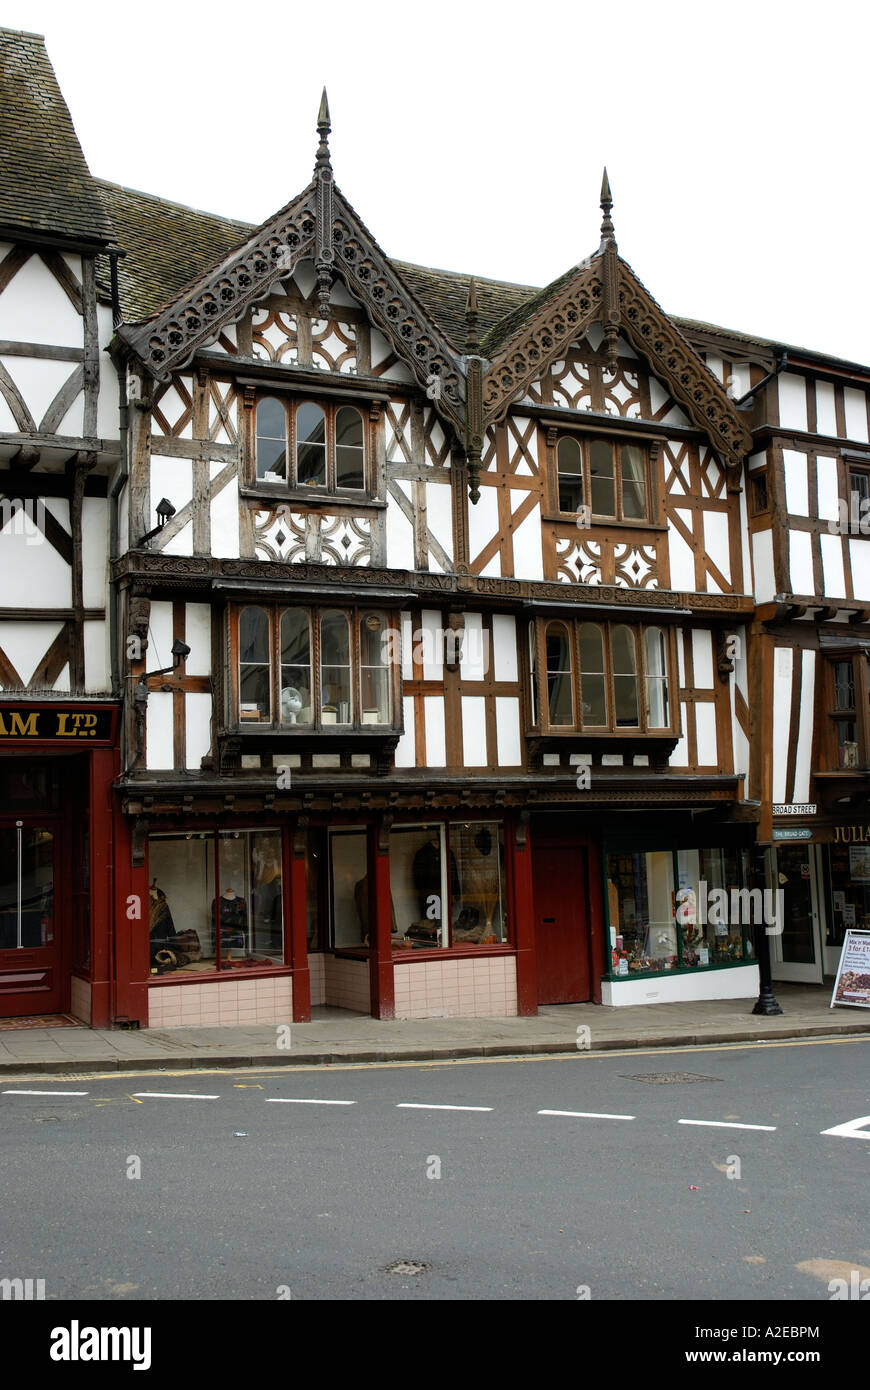 One of the many 'Black and White' building in the picturesque shropshire town of Ludlow. Stock Photo